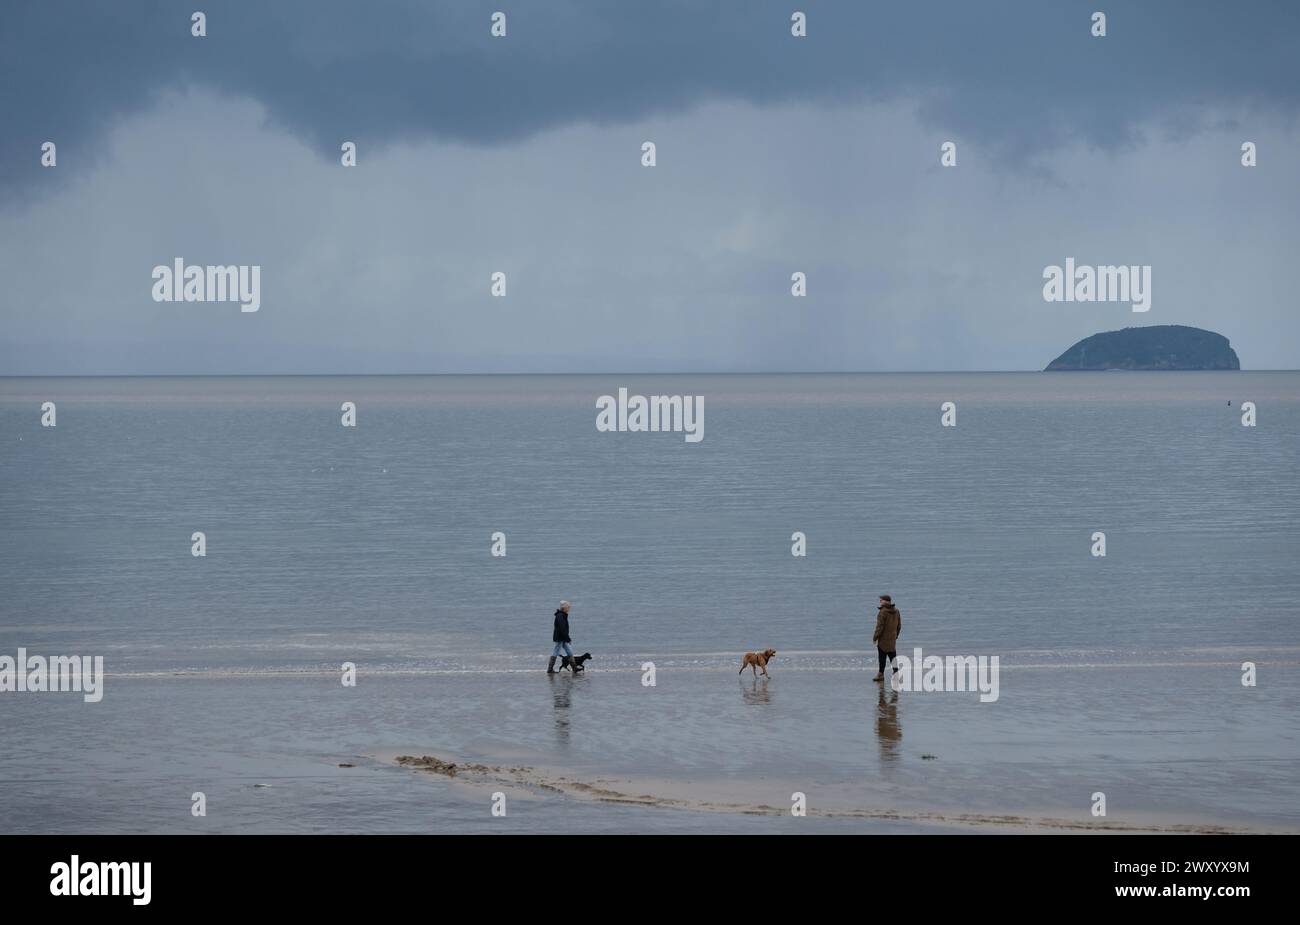 People walking on a cold, wet, windy, rainy beach. Stock Photo